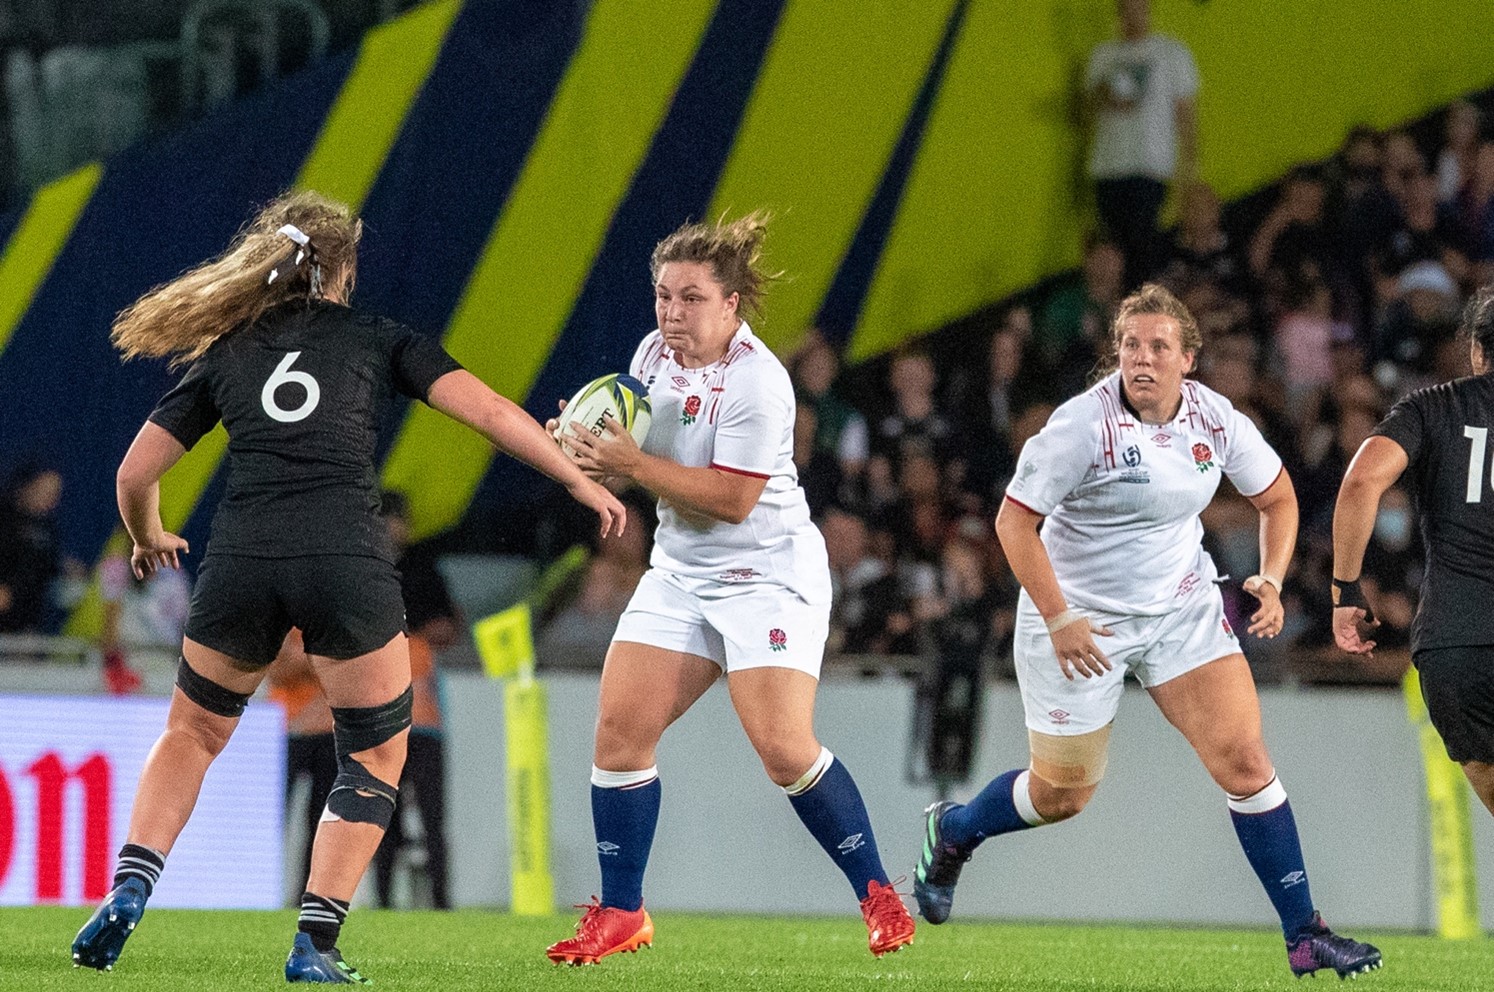 RAF aviators to play in Women's Rugby World Cup | Royal Air Force